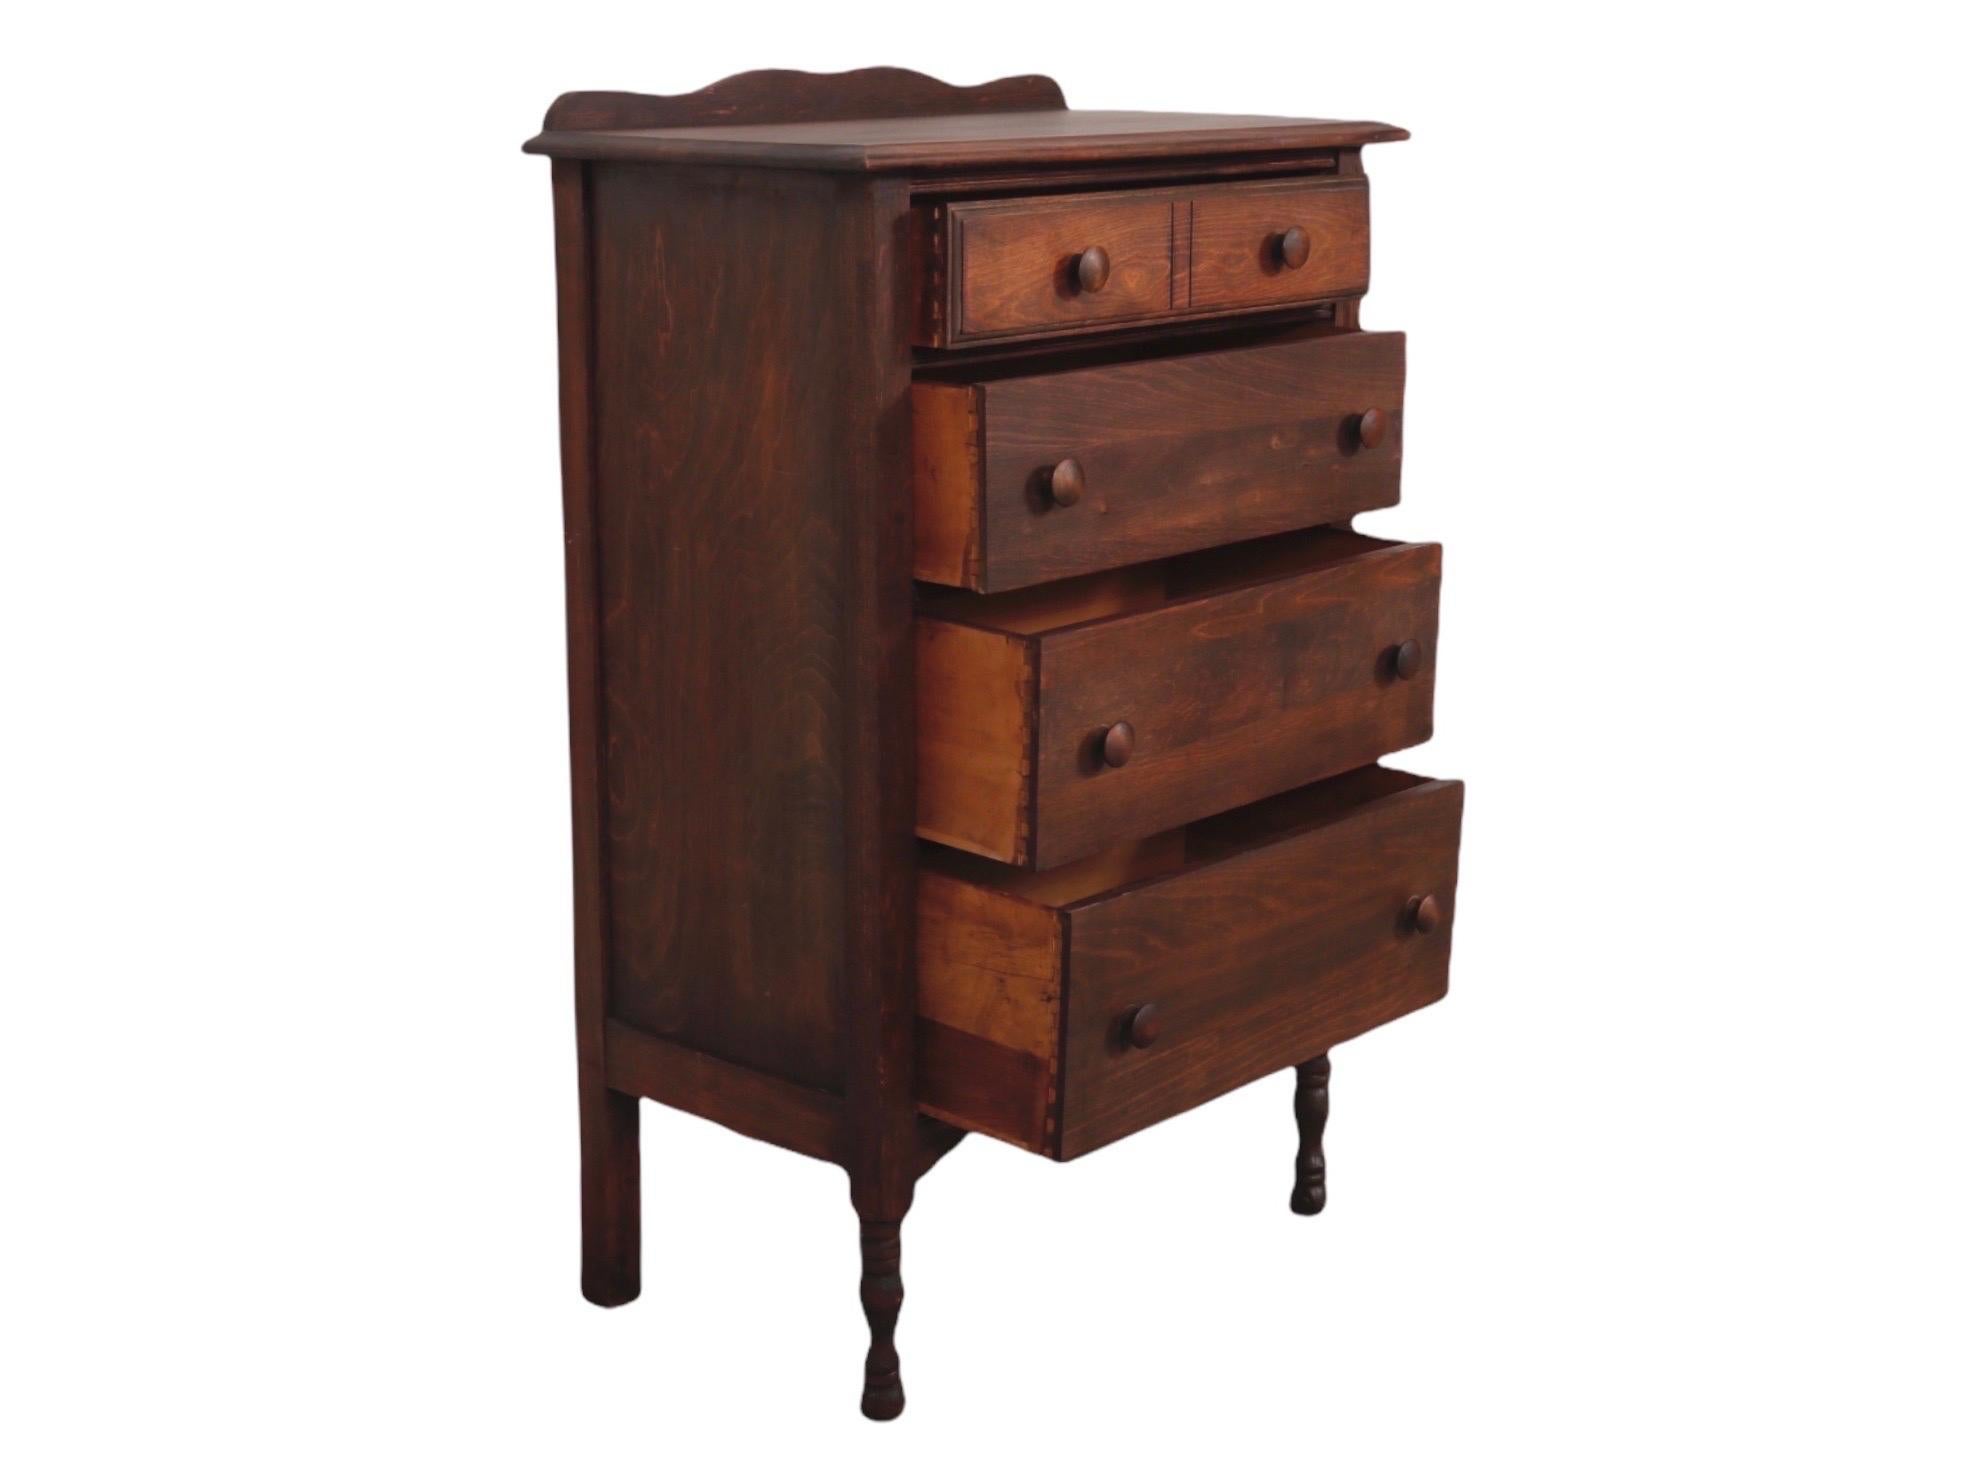 A petite standing chest of drawers, trimmed on top with a slender serpentine back splash. Four hand dovetailed drawers open with mushroom knob handles. The top drawer front is carved to give the look of two drawers. Front turned legs finish in bun